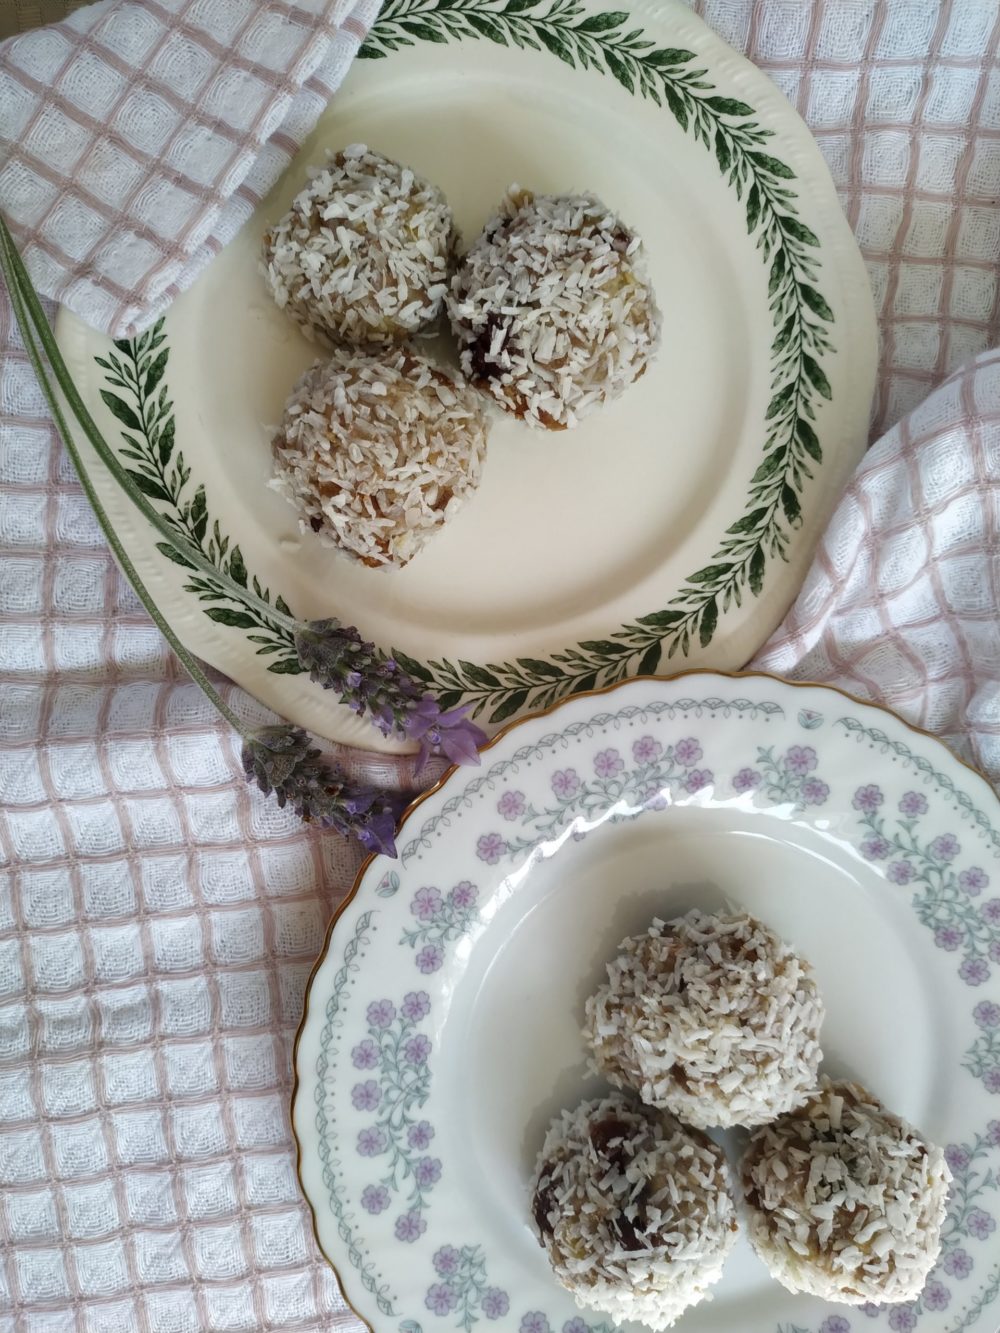 banana coconut energy balls on a floral plate